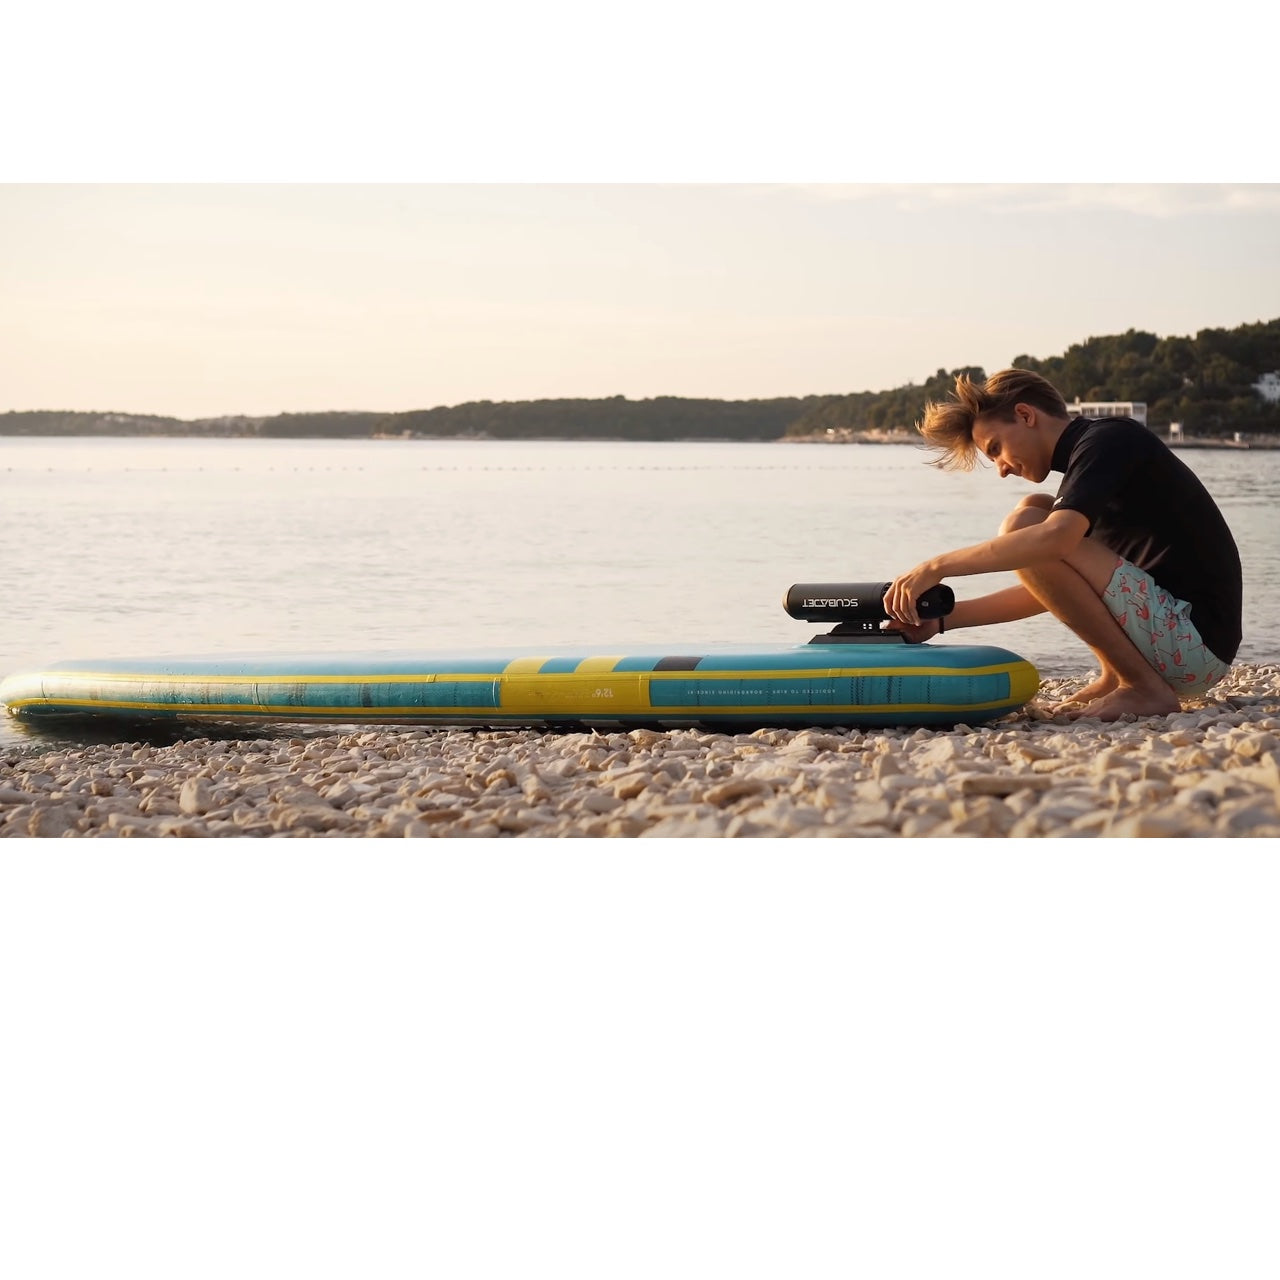 A young man attaches his ScubaJet Pro to a paddleboard. He will use it as a paddle board motor.